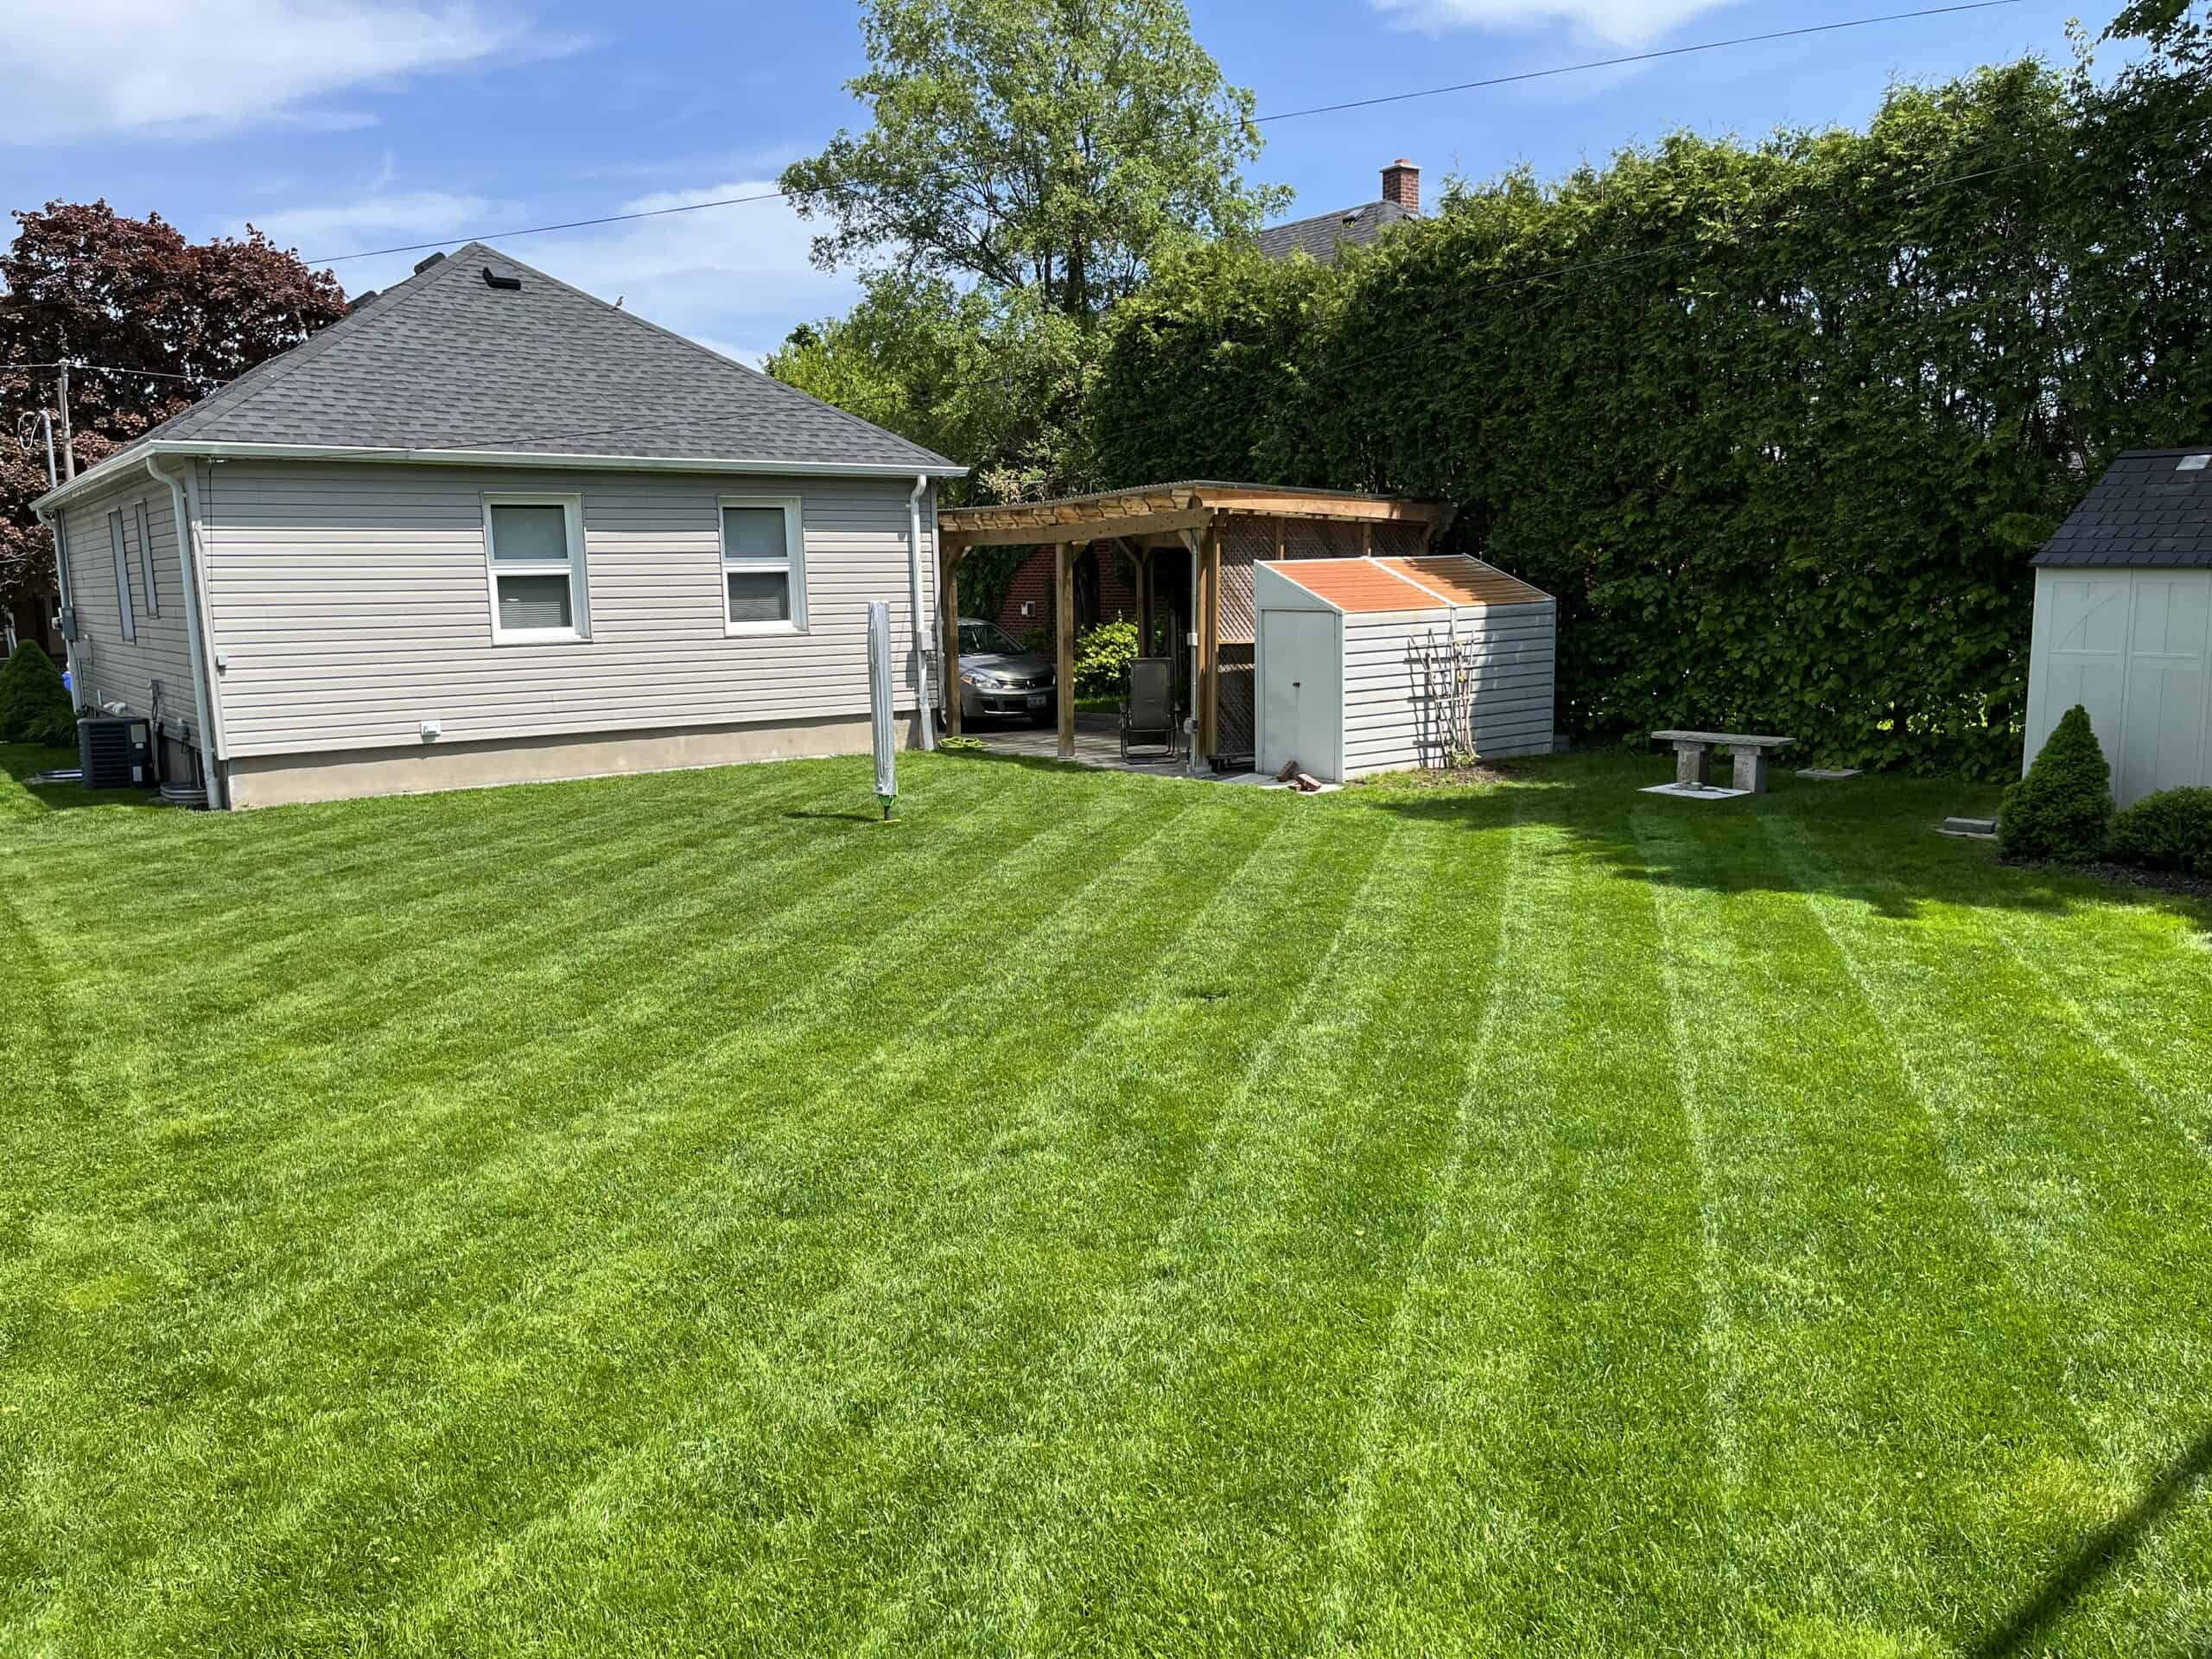 a large green lawn with diagonal mowing tracks leading to a house, shed, and pergola